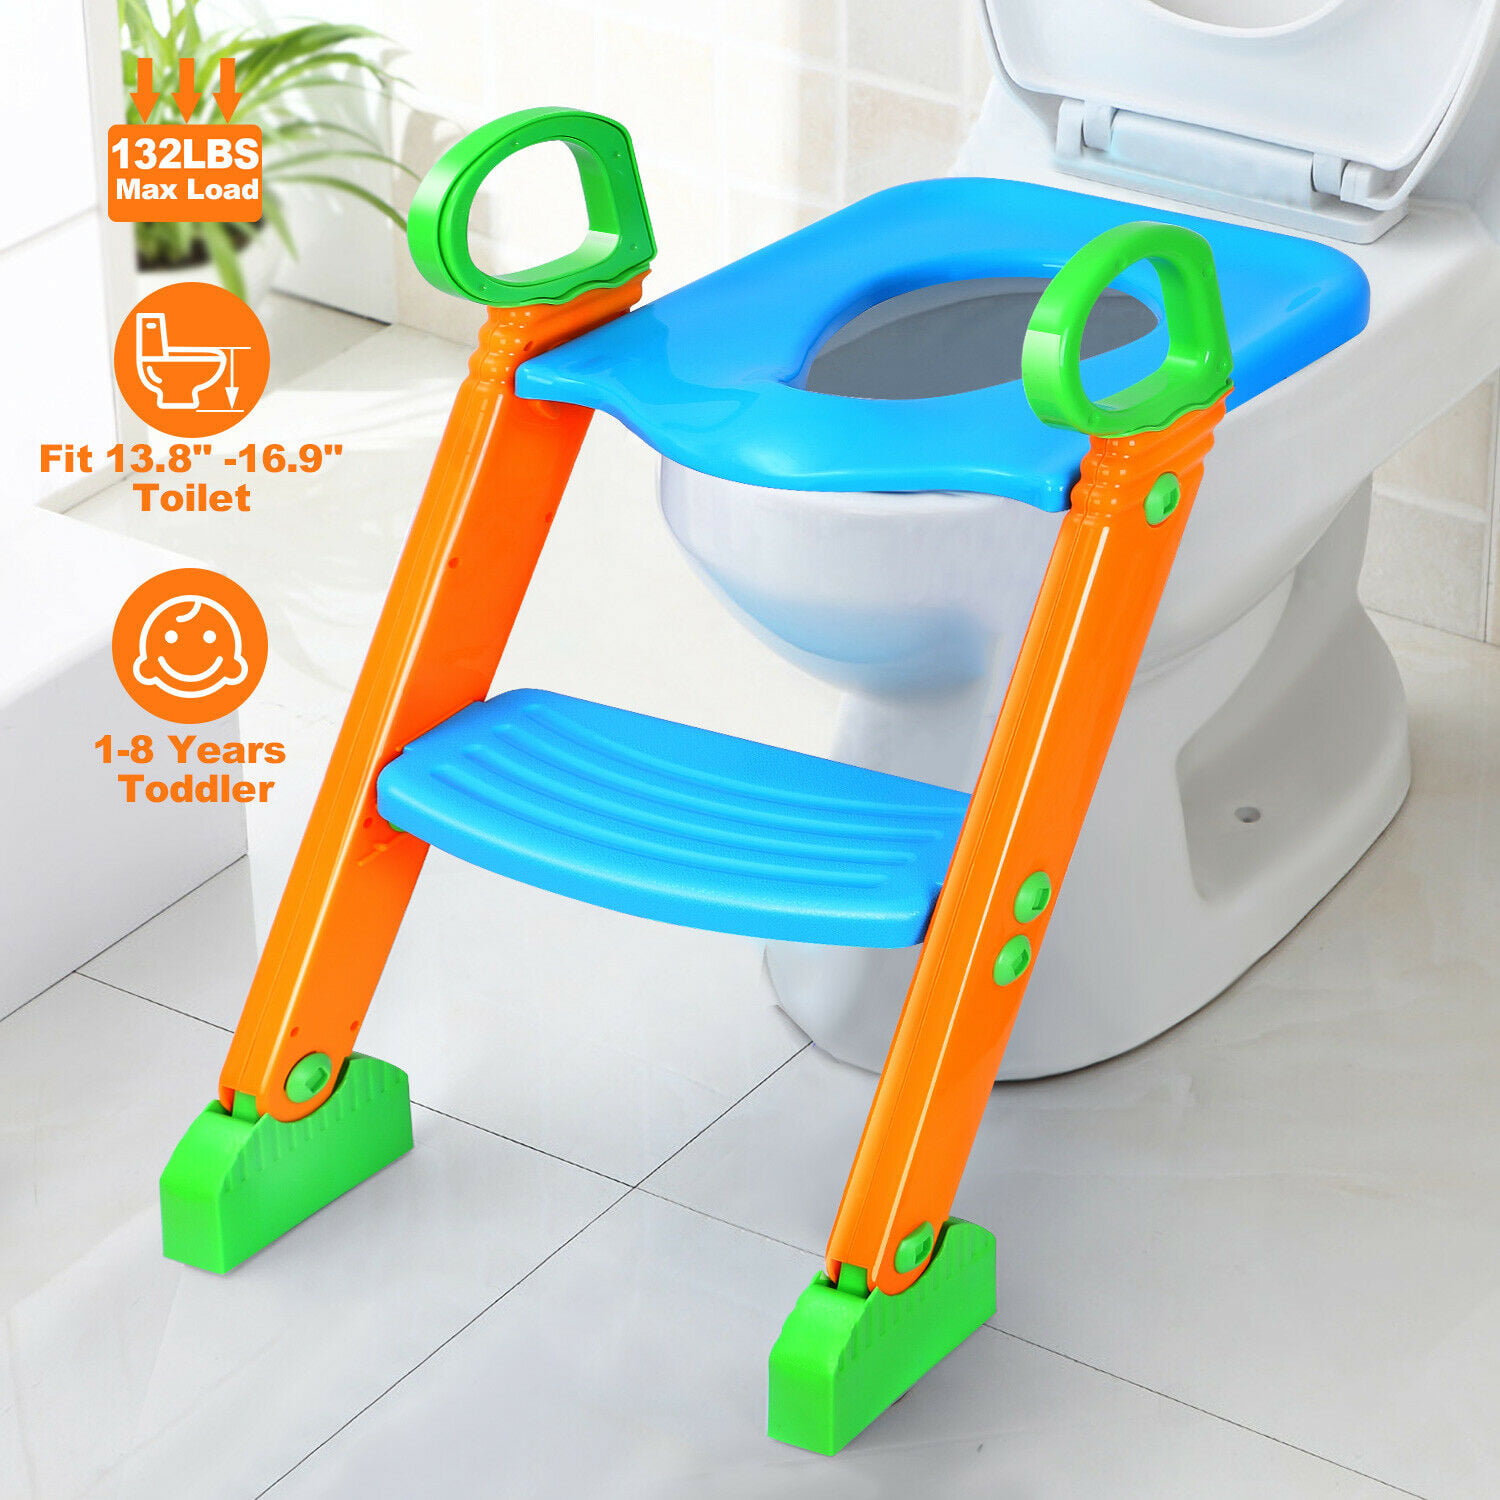 CHILD TODDLER POTTY TRAINING SEAT BABY KID TOILET PLASTIC TRAINER CHAIR URINAL 